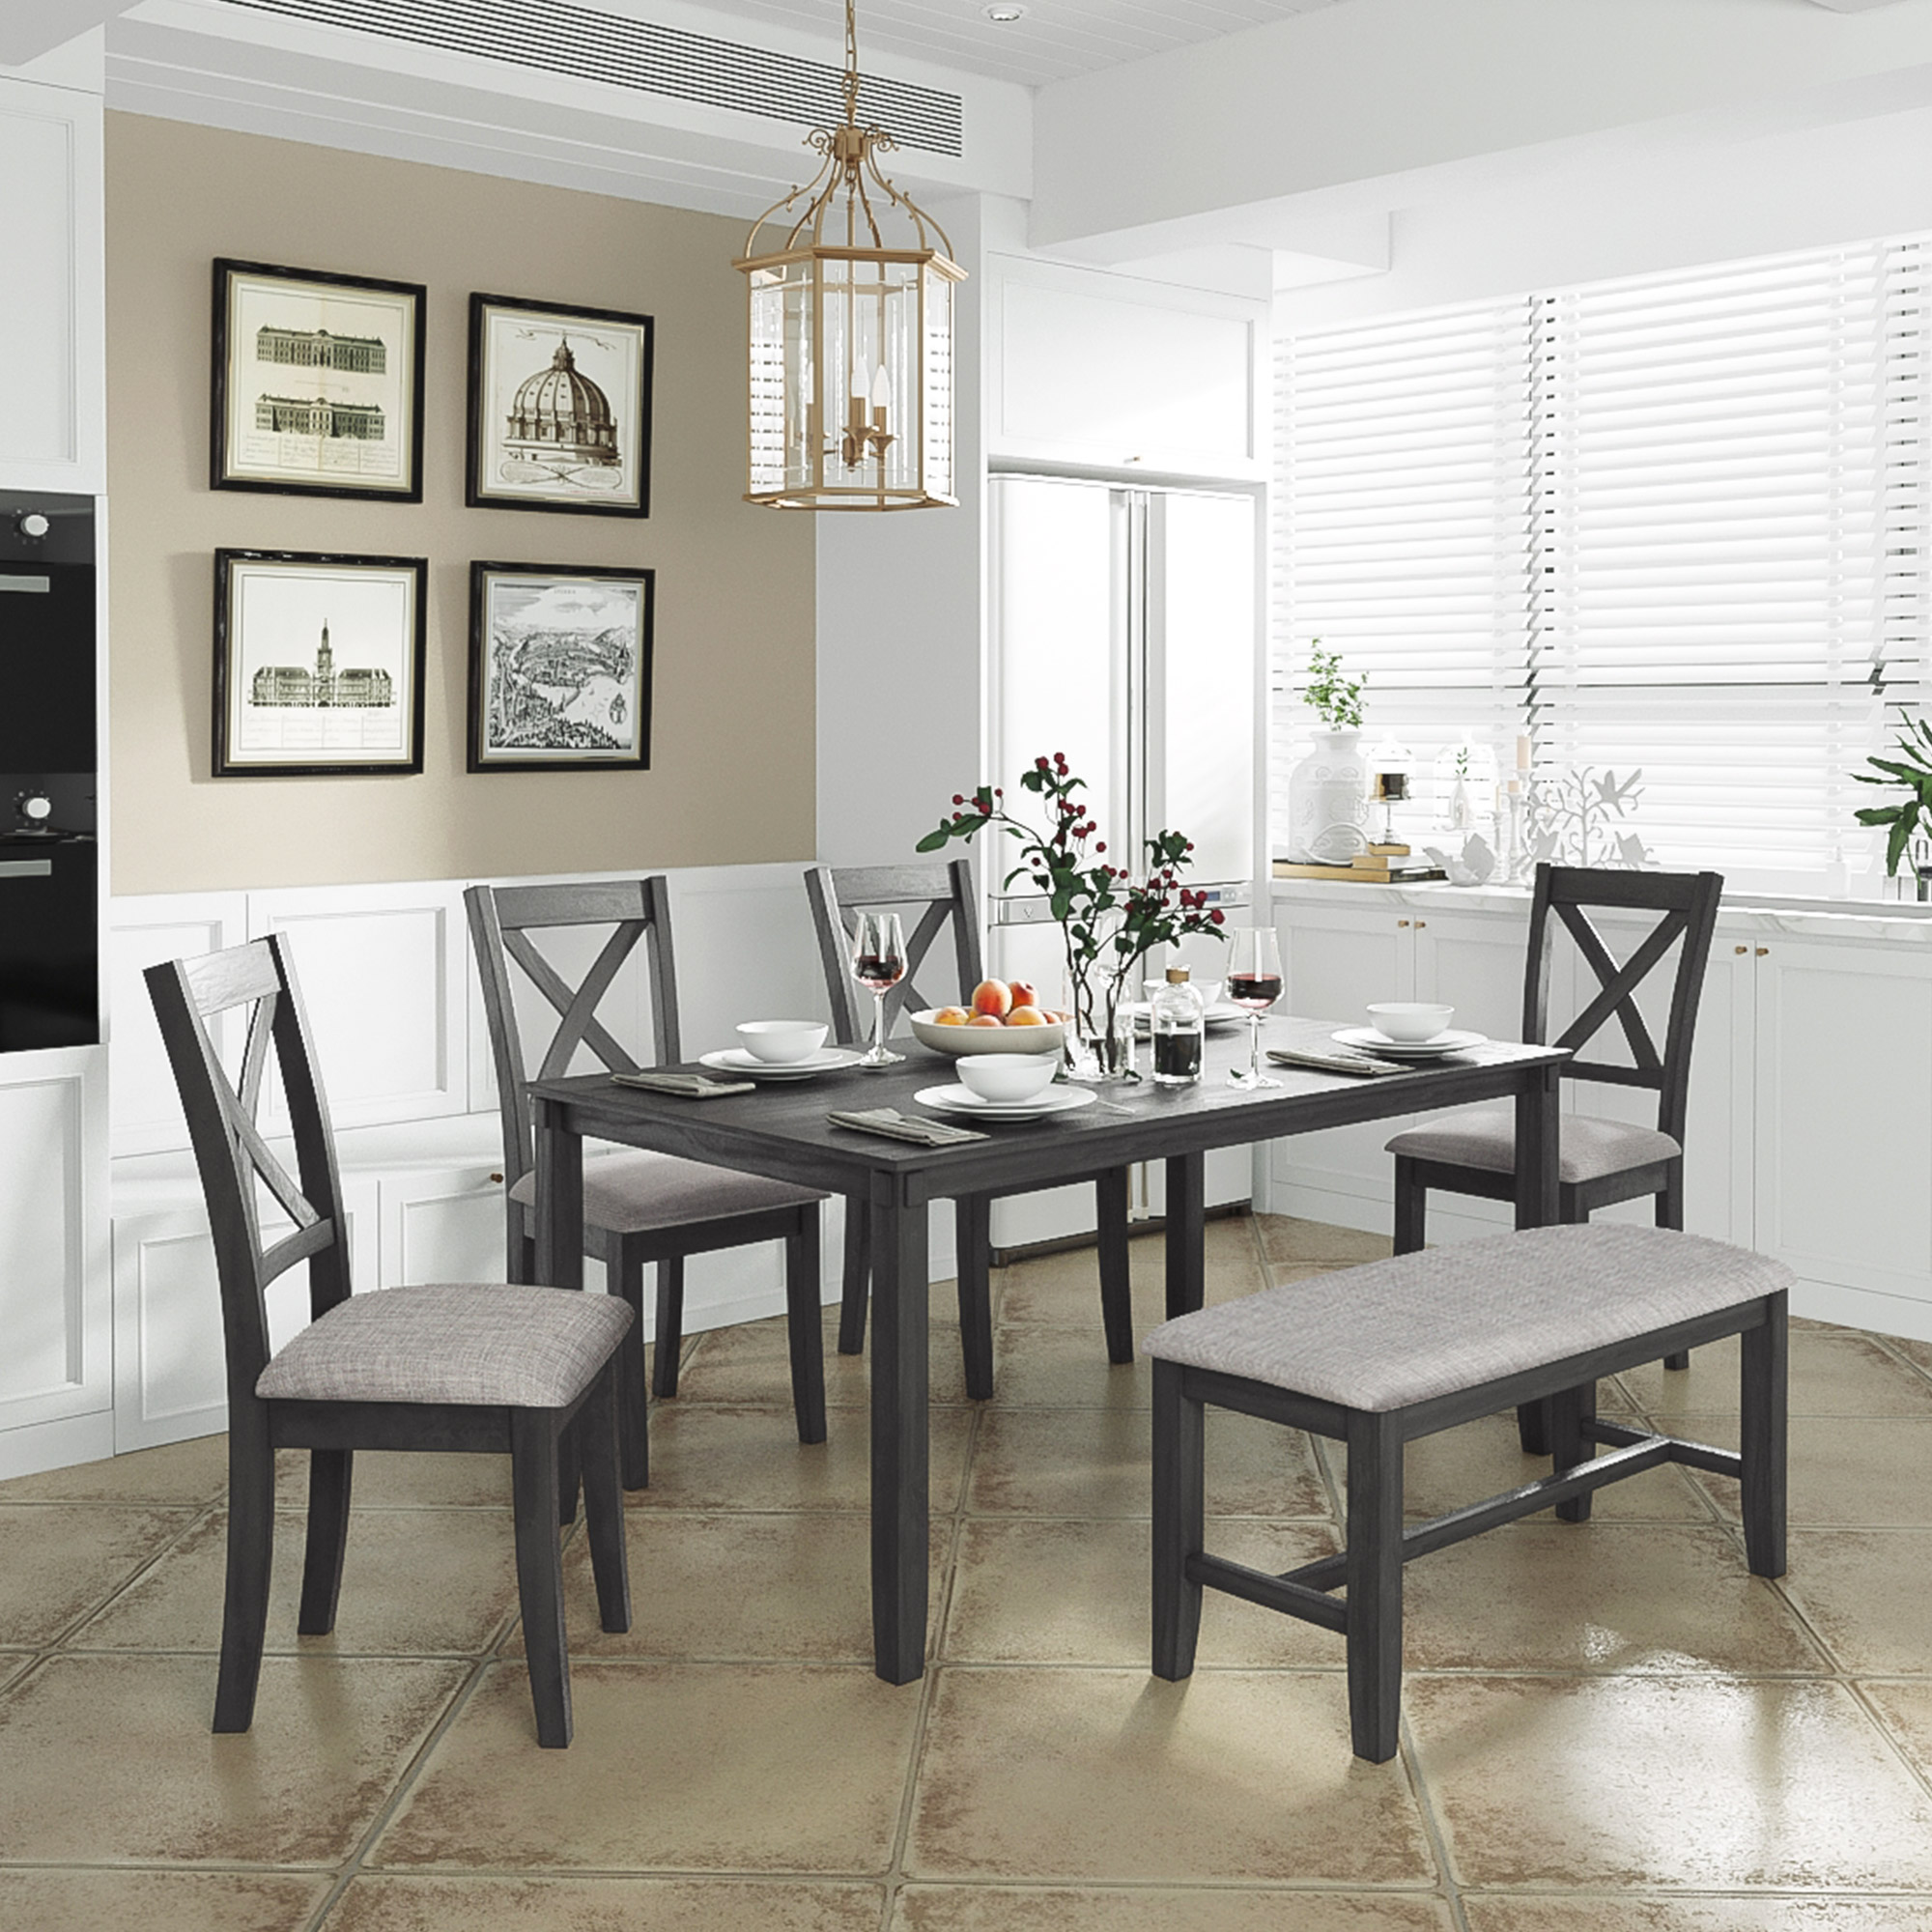 TREXM 6-Piece Kitchen Dining Table and Chair Set - ST000013AAE